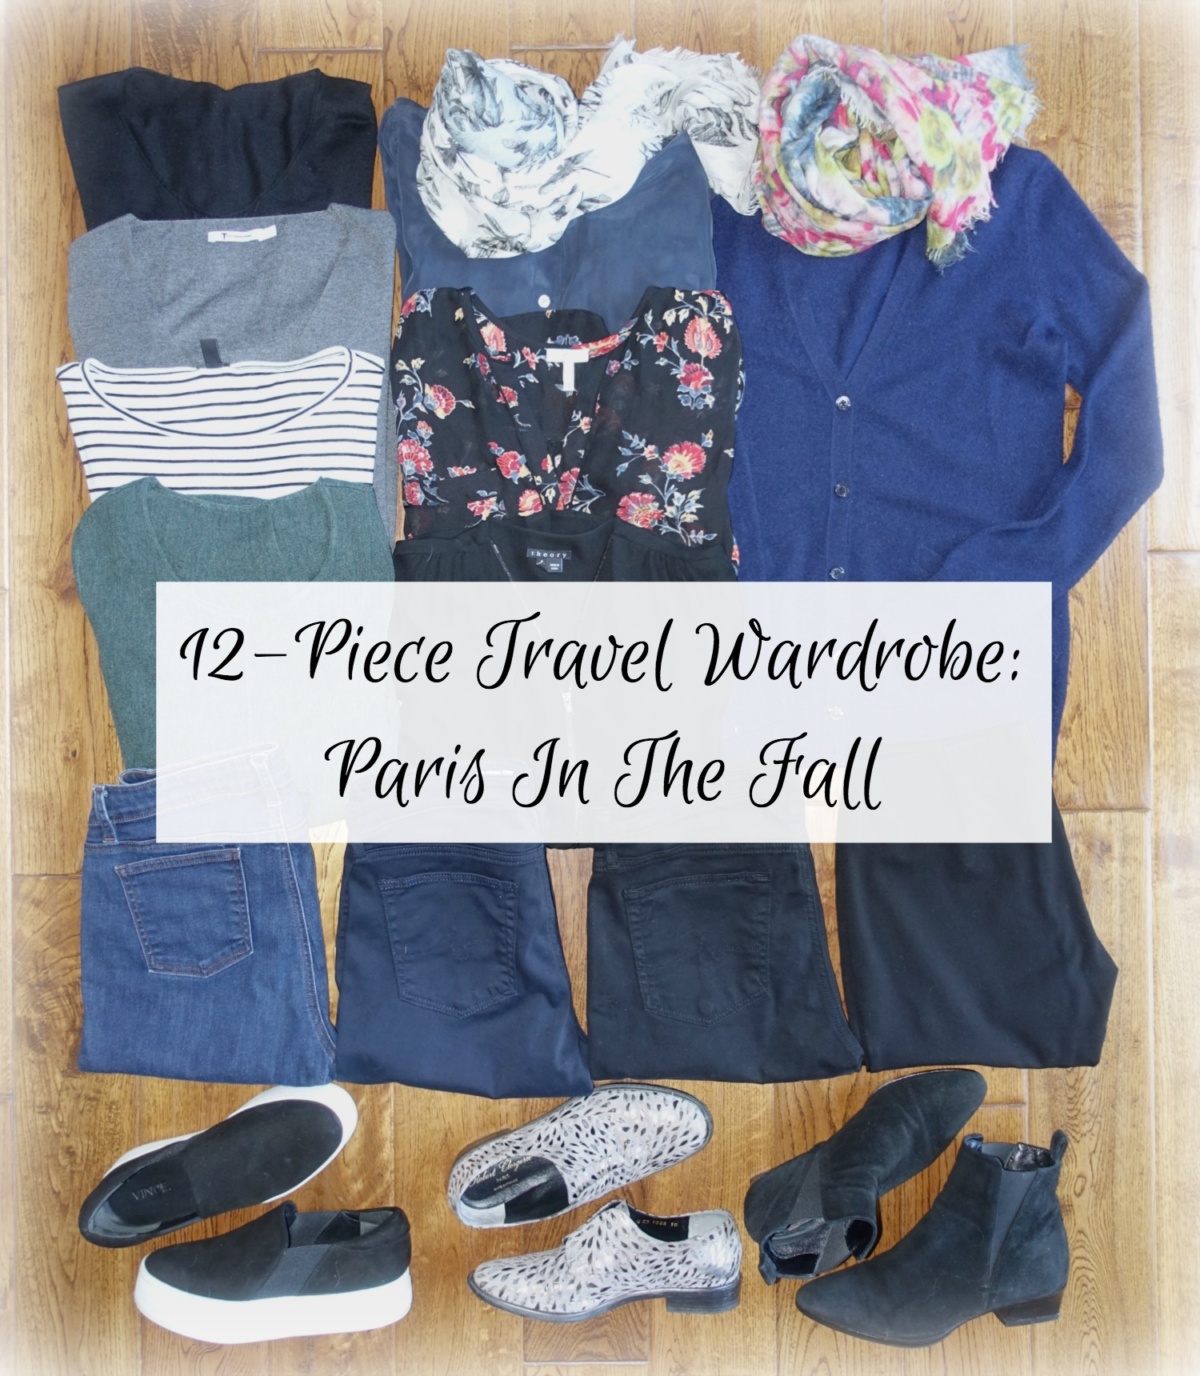 Style blogger Susan B. shares her 12-piece travel wardrobe for Paris in the fall. Details at une femme d'un certain age.